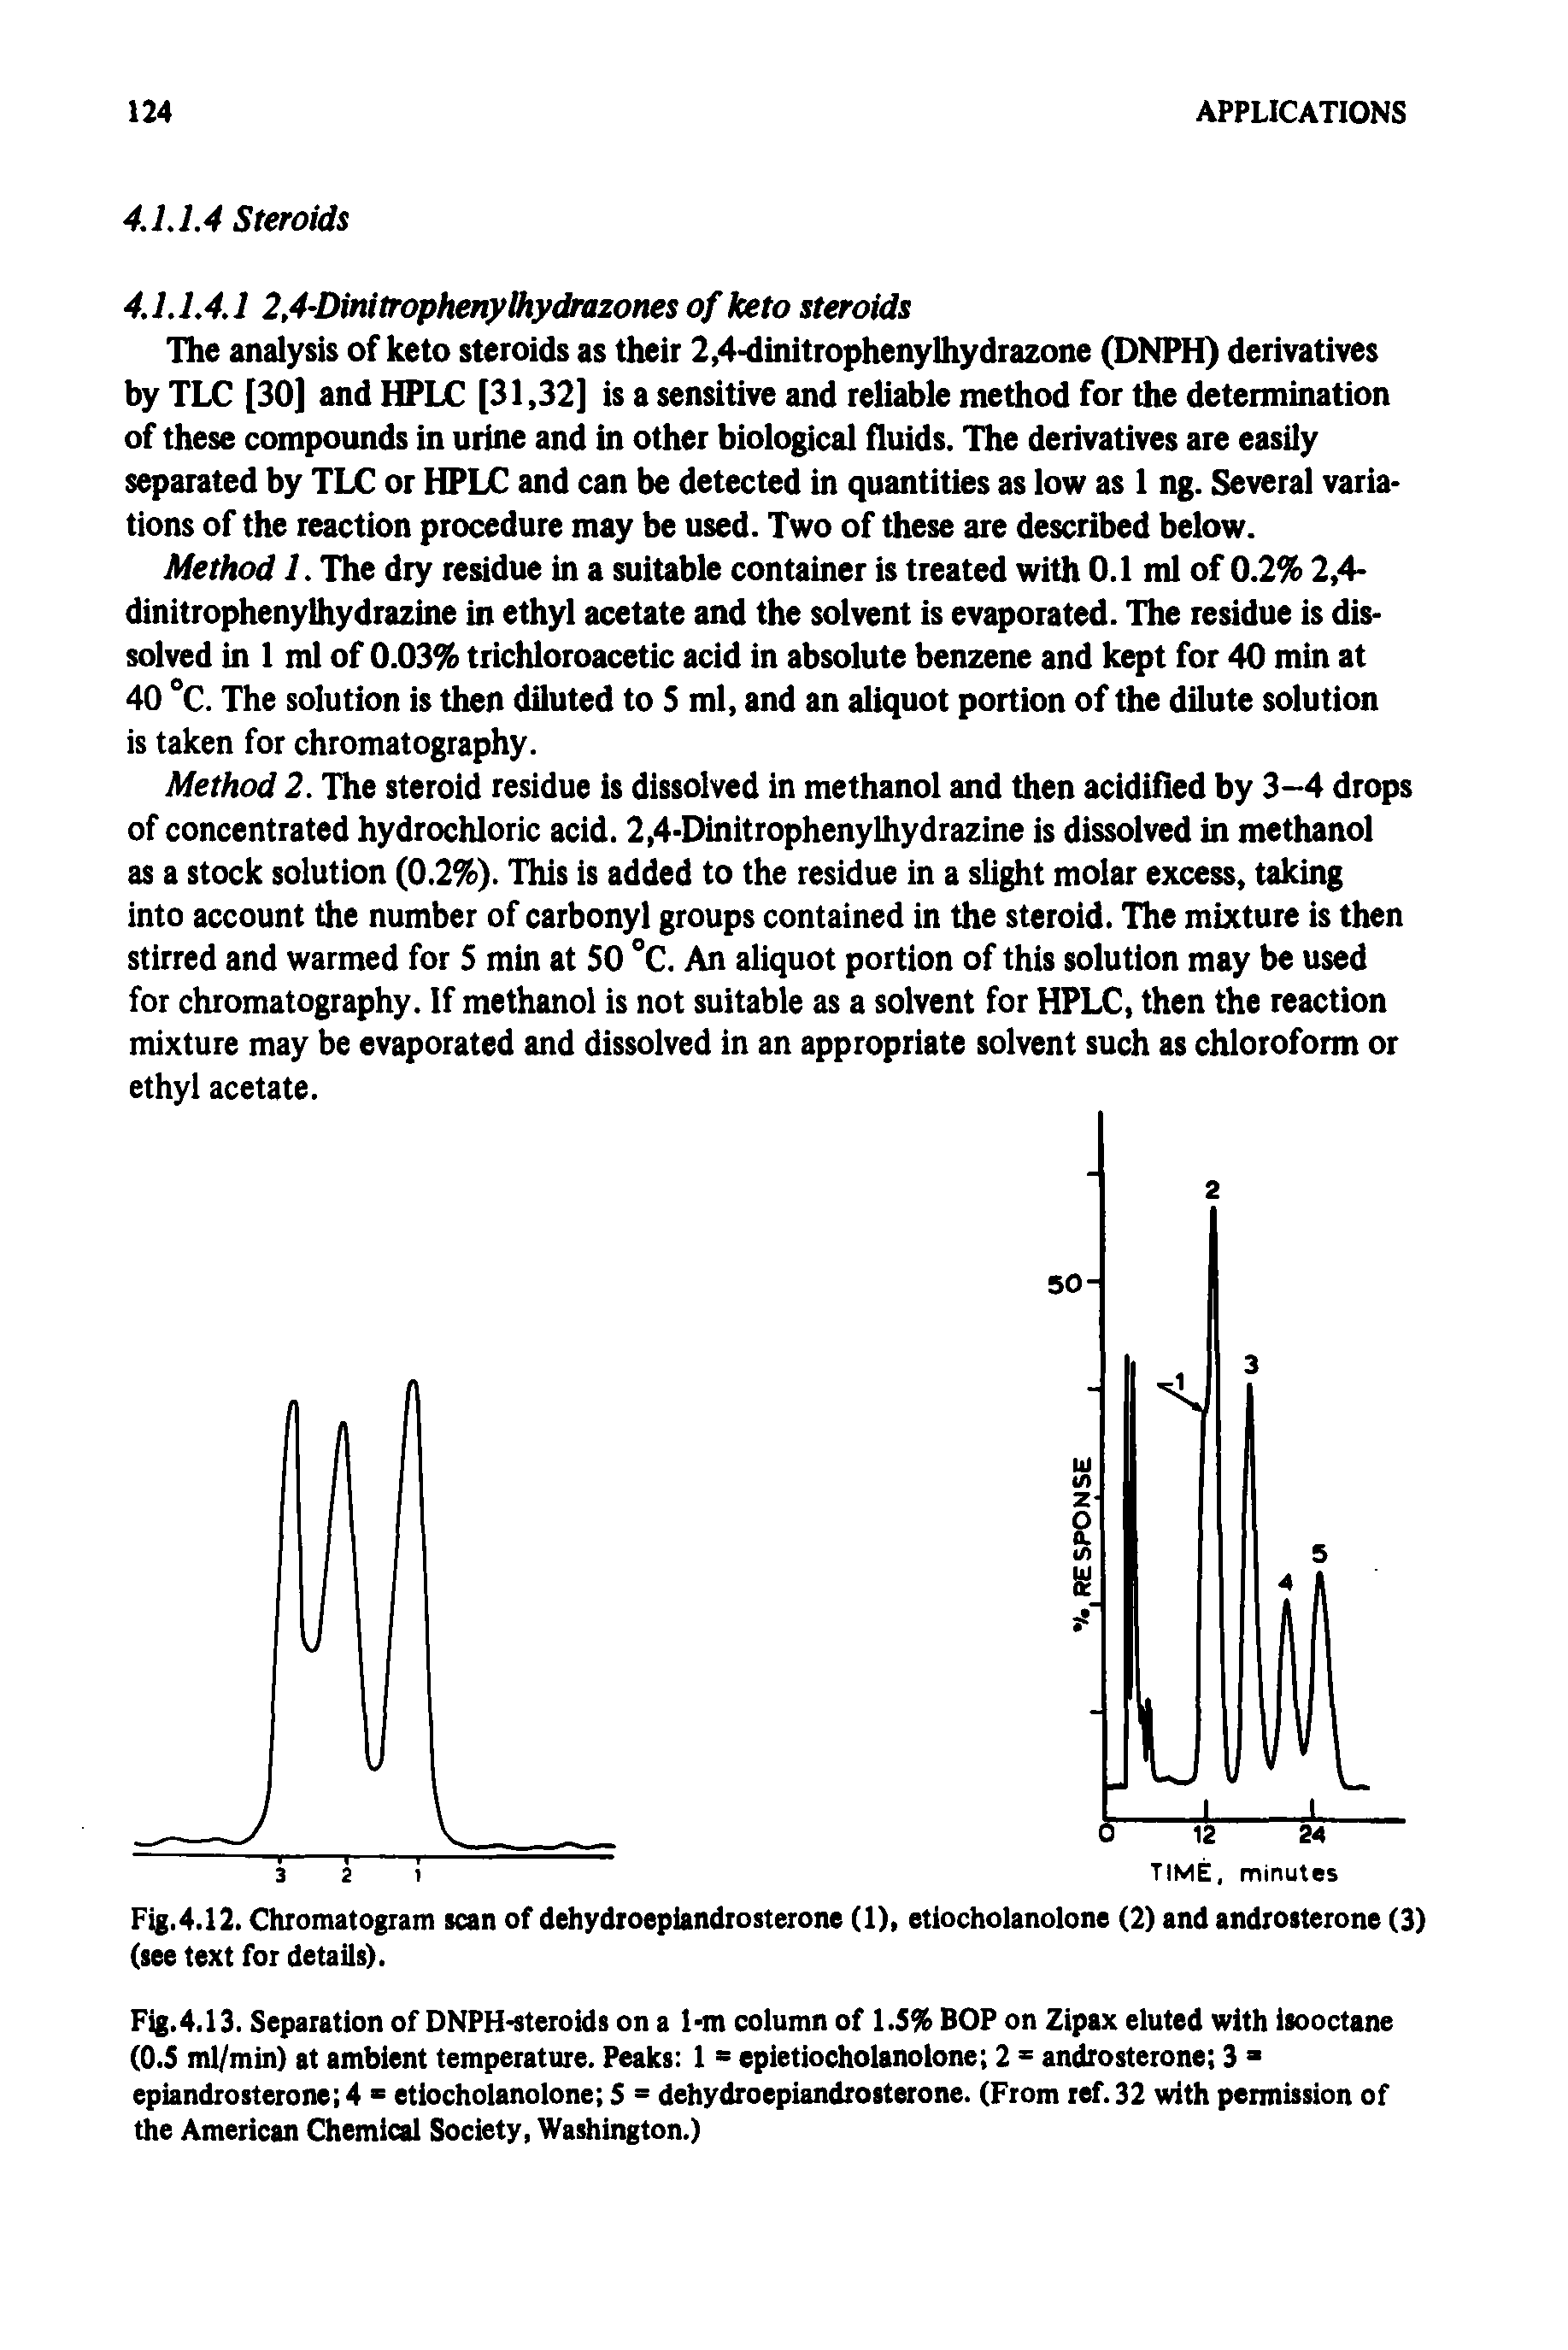 Fig.4.13. Separation of DNPH-steroids on a 1-m column of 1.3% BOP on Zipax eluted with isooctane (0.5 ml/min) at ambient temperature. Peaks 1 = epietiocholanolone 2 = androsterone 3 = epiandrosterone 4 = etiocholanolone S = dehydroepiandrosterone. (From ref. 32 with permission of the American Chemical Society, Washington.)...